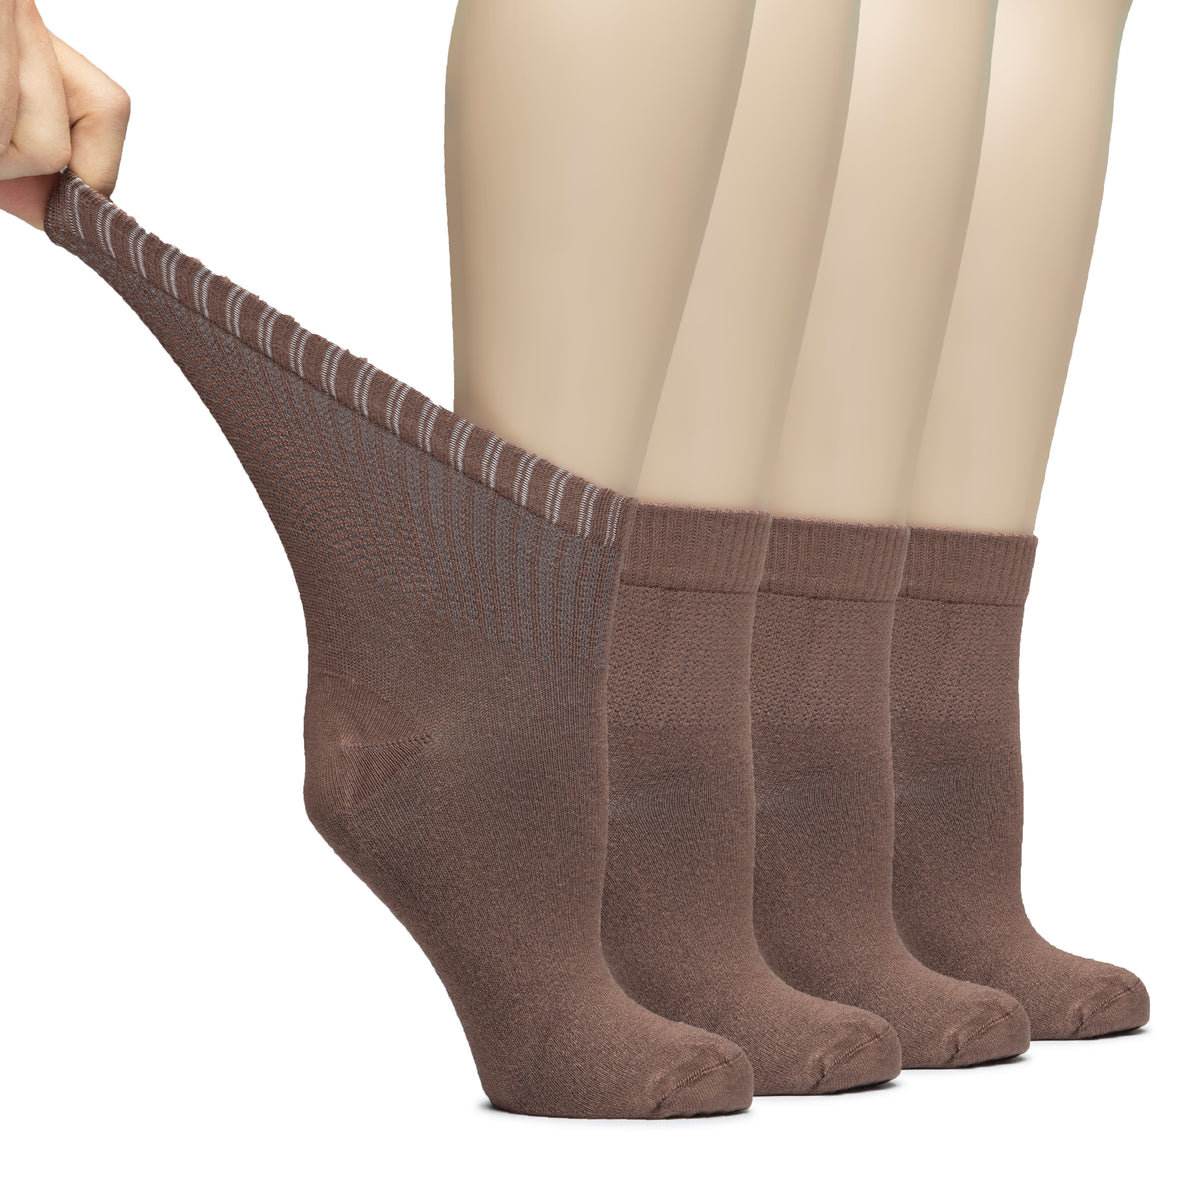 These women's cotton ankle socks feature brown stripes and are designed for diabetics. Made with bamboo for added comfort and breathability.